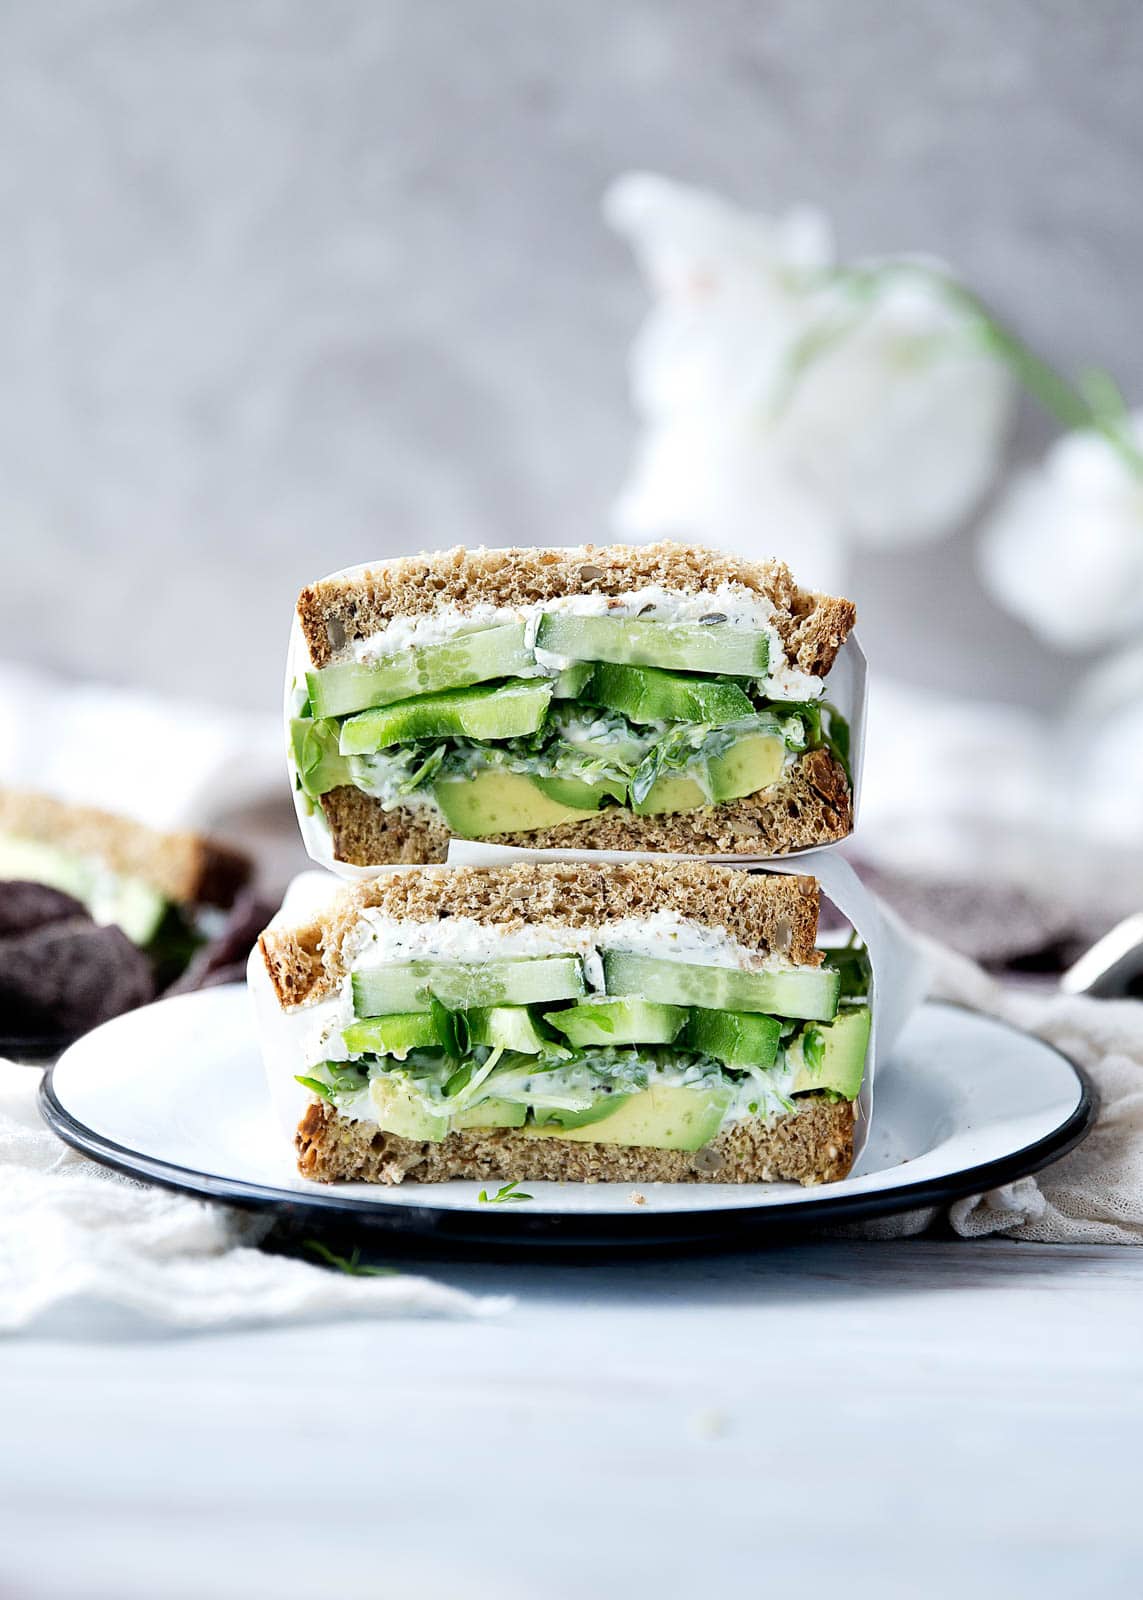 A green sandwich bursting at the seams with herbed goat cheese, avocado, alfalfa, and more.